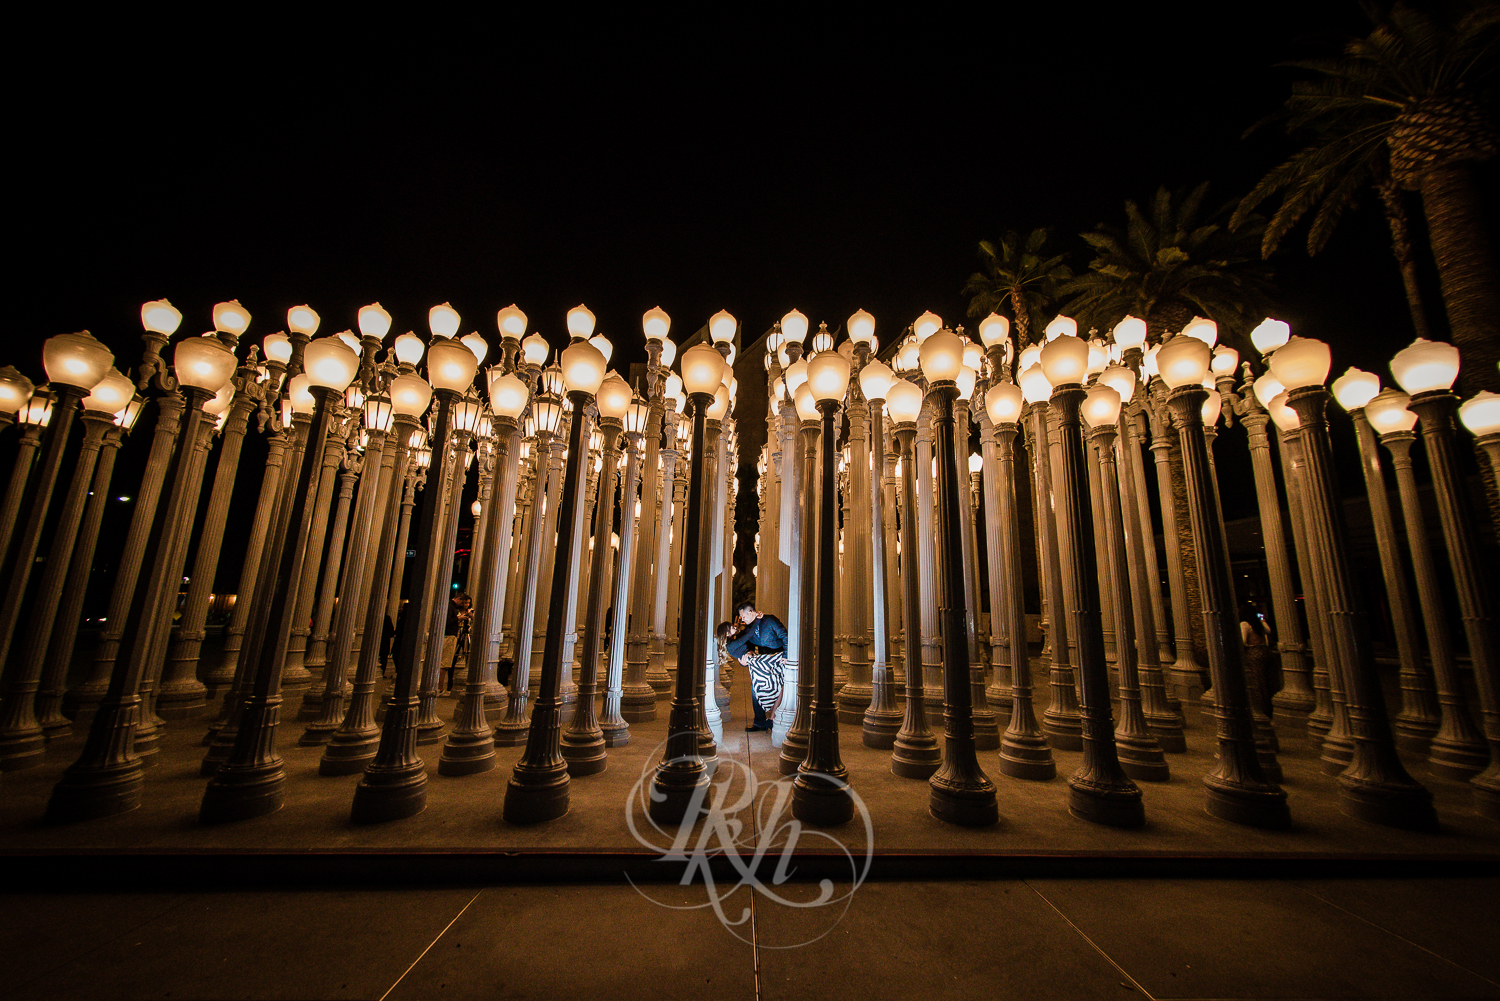  Thuy & Allen - RKH Images - Los Angeles Engagement Photography - Blog-10 